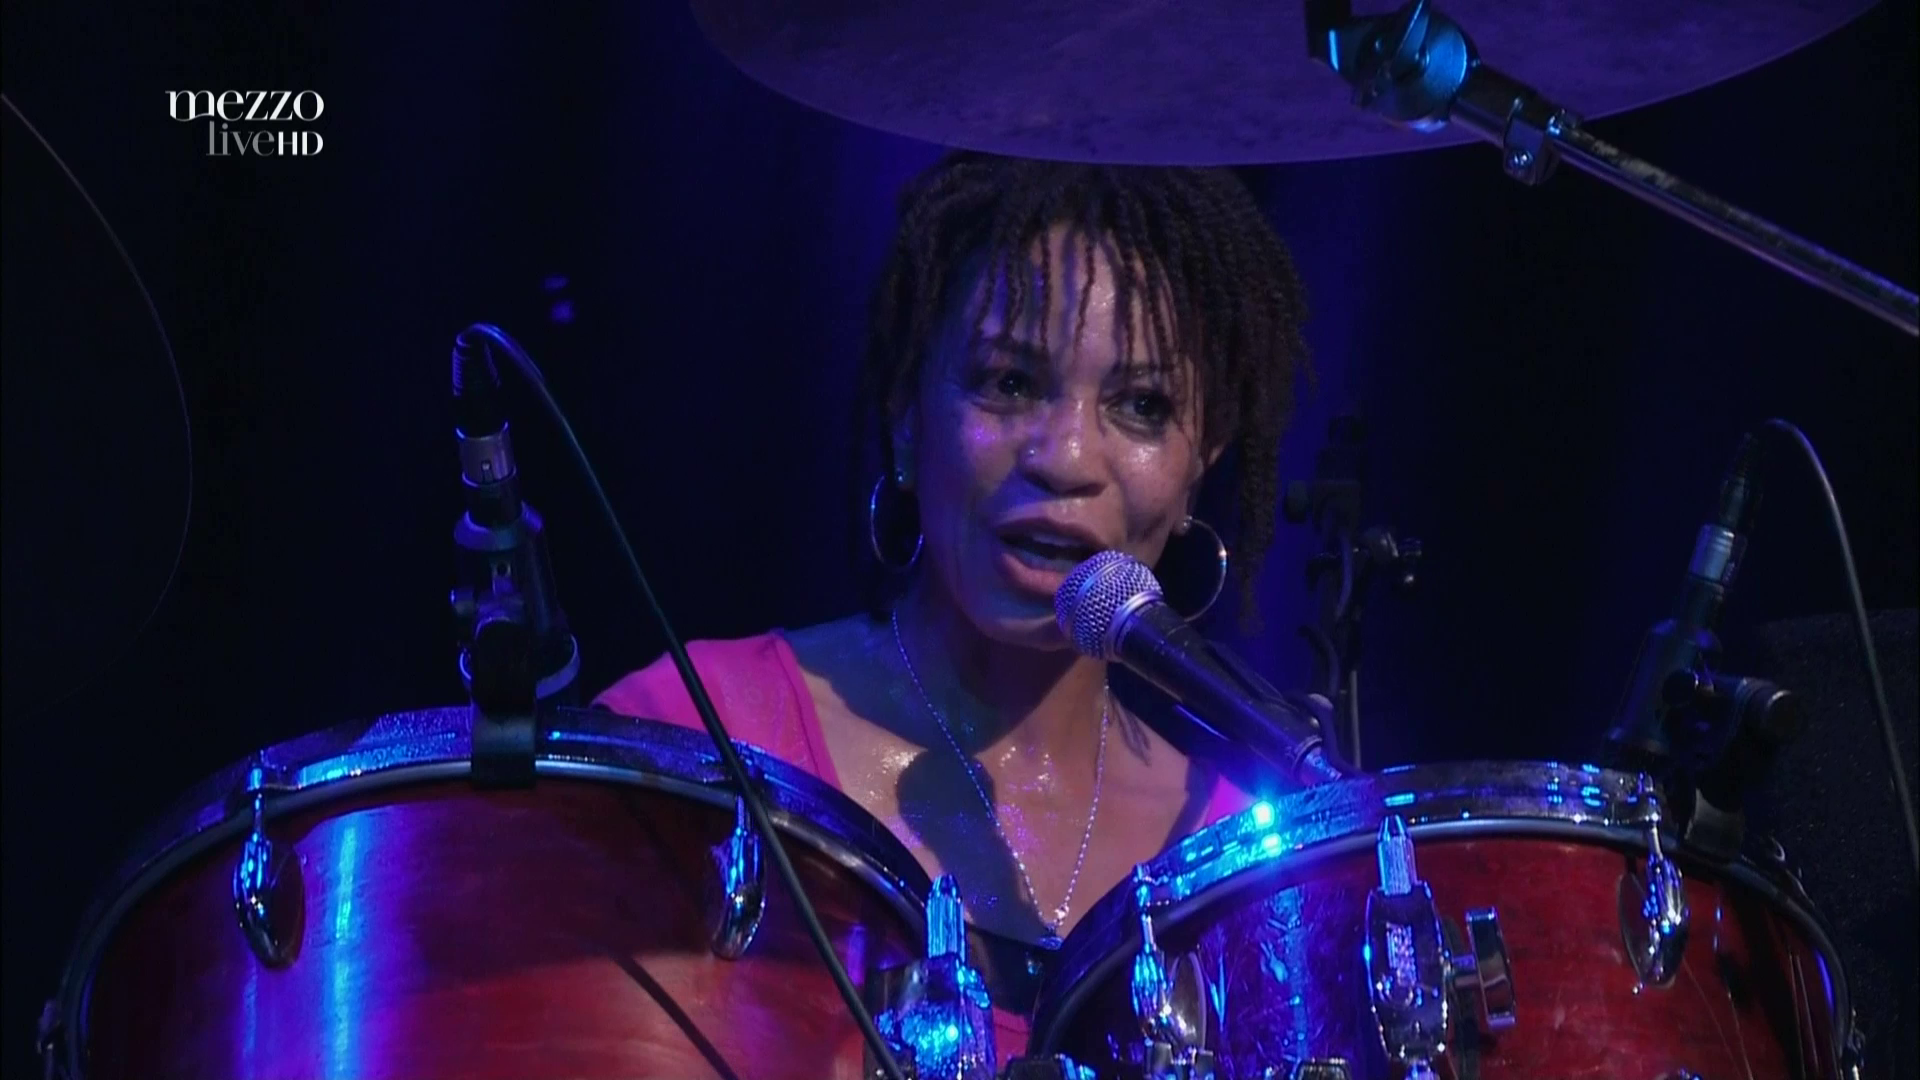 2012 Spectrum Road - Live at Porgy and Bess Vienna [HDTV 1080p] 11